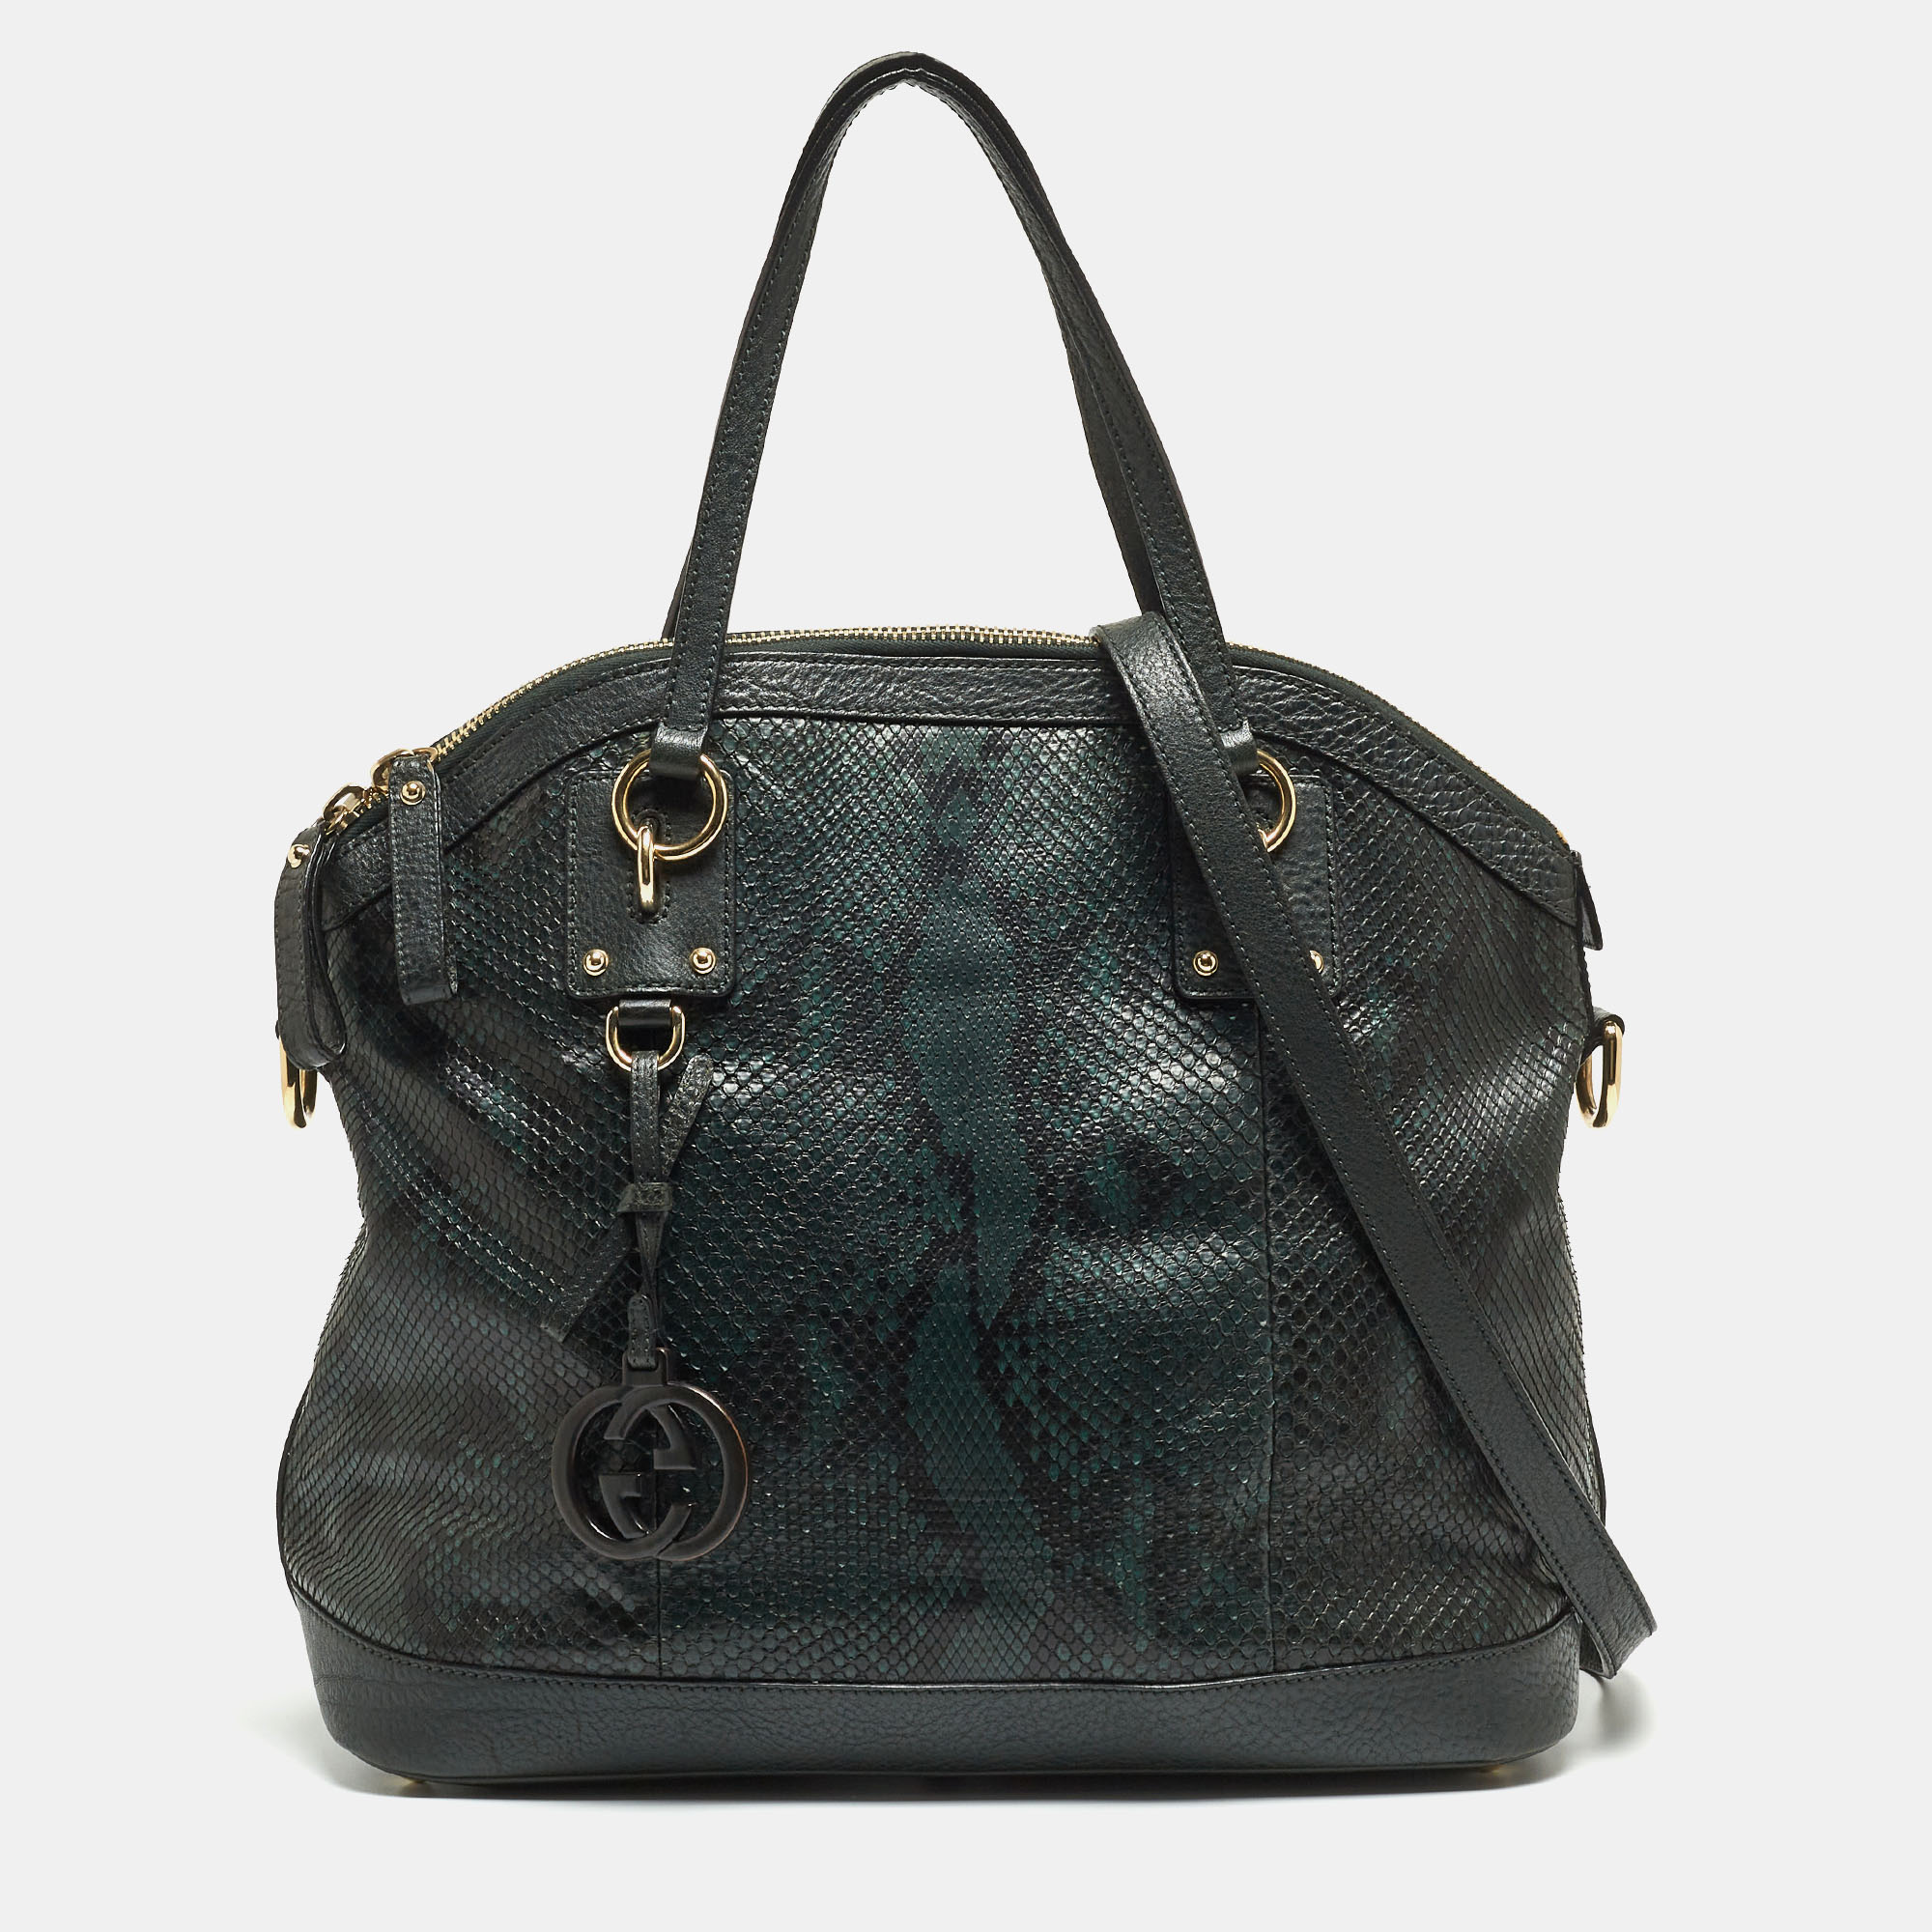 Pre-owned Gucci Green/black Python Leather Convertible Gg Charm Dome Satchel